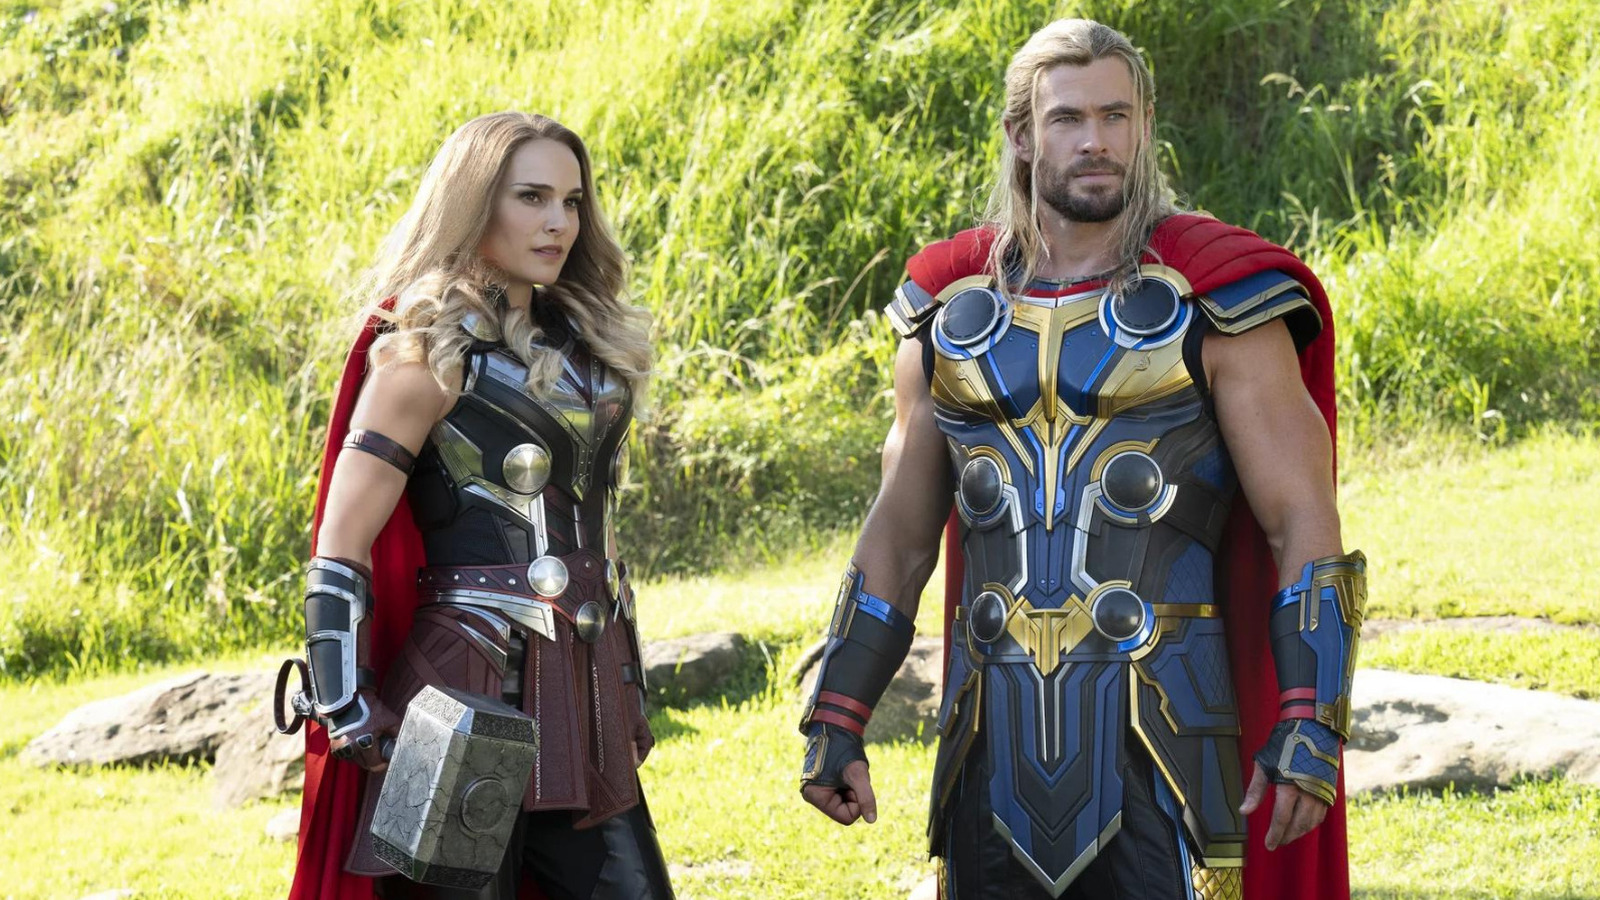 Latest Marvel flick might leave you 'Thor' from laughter